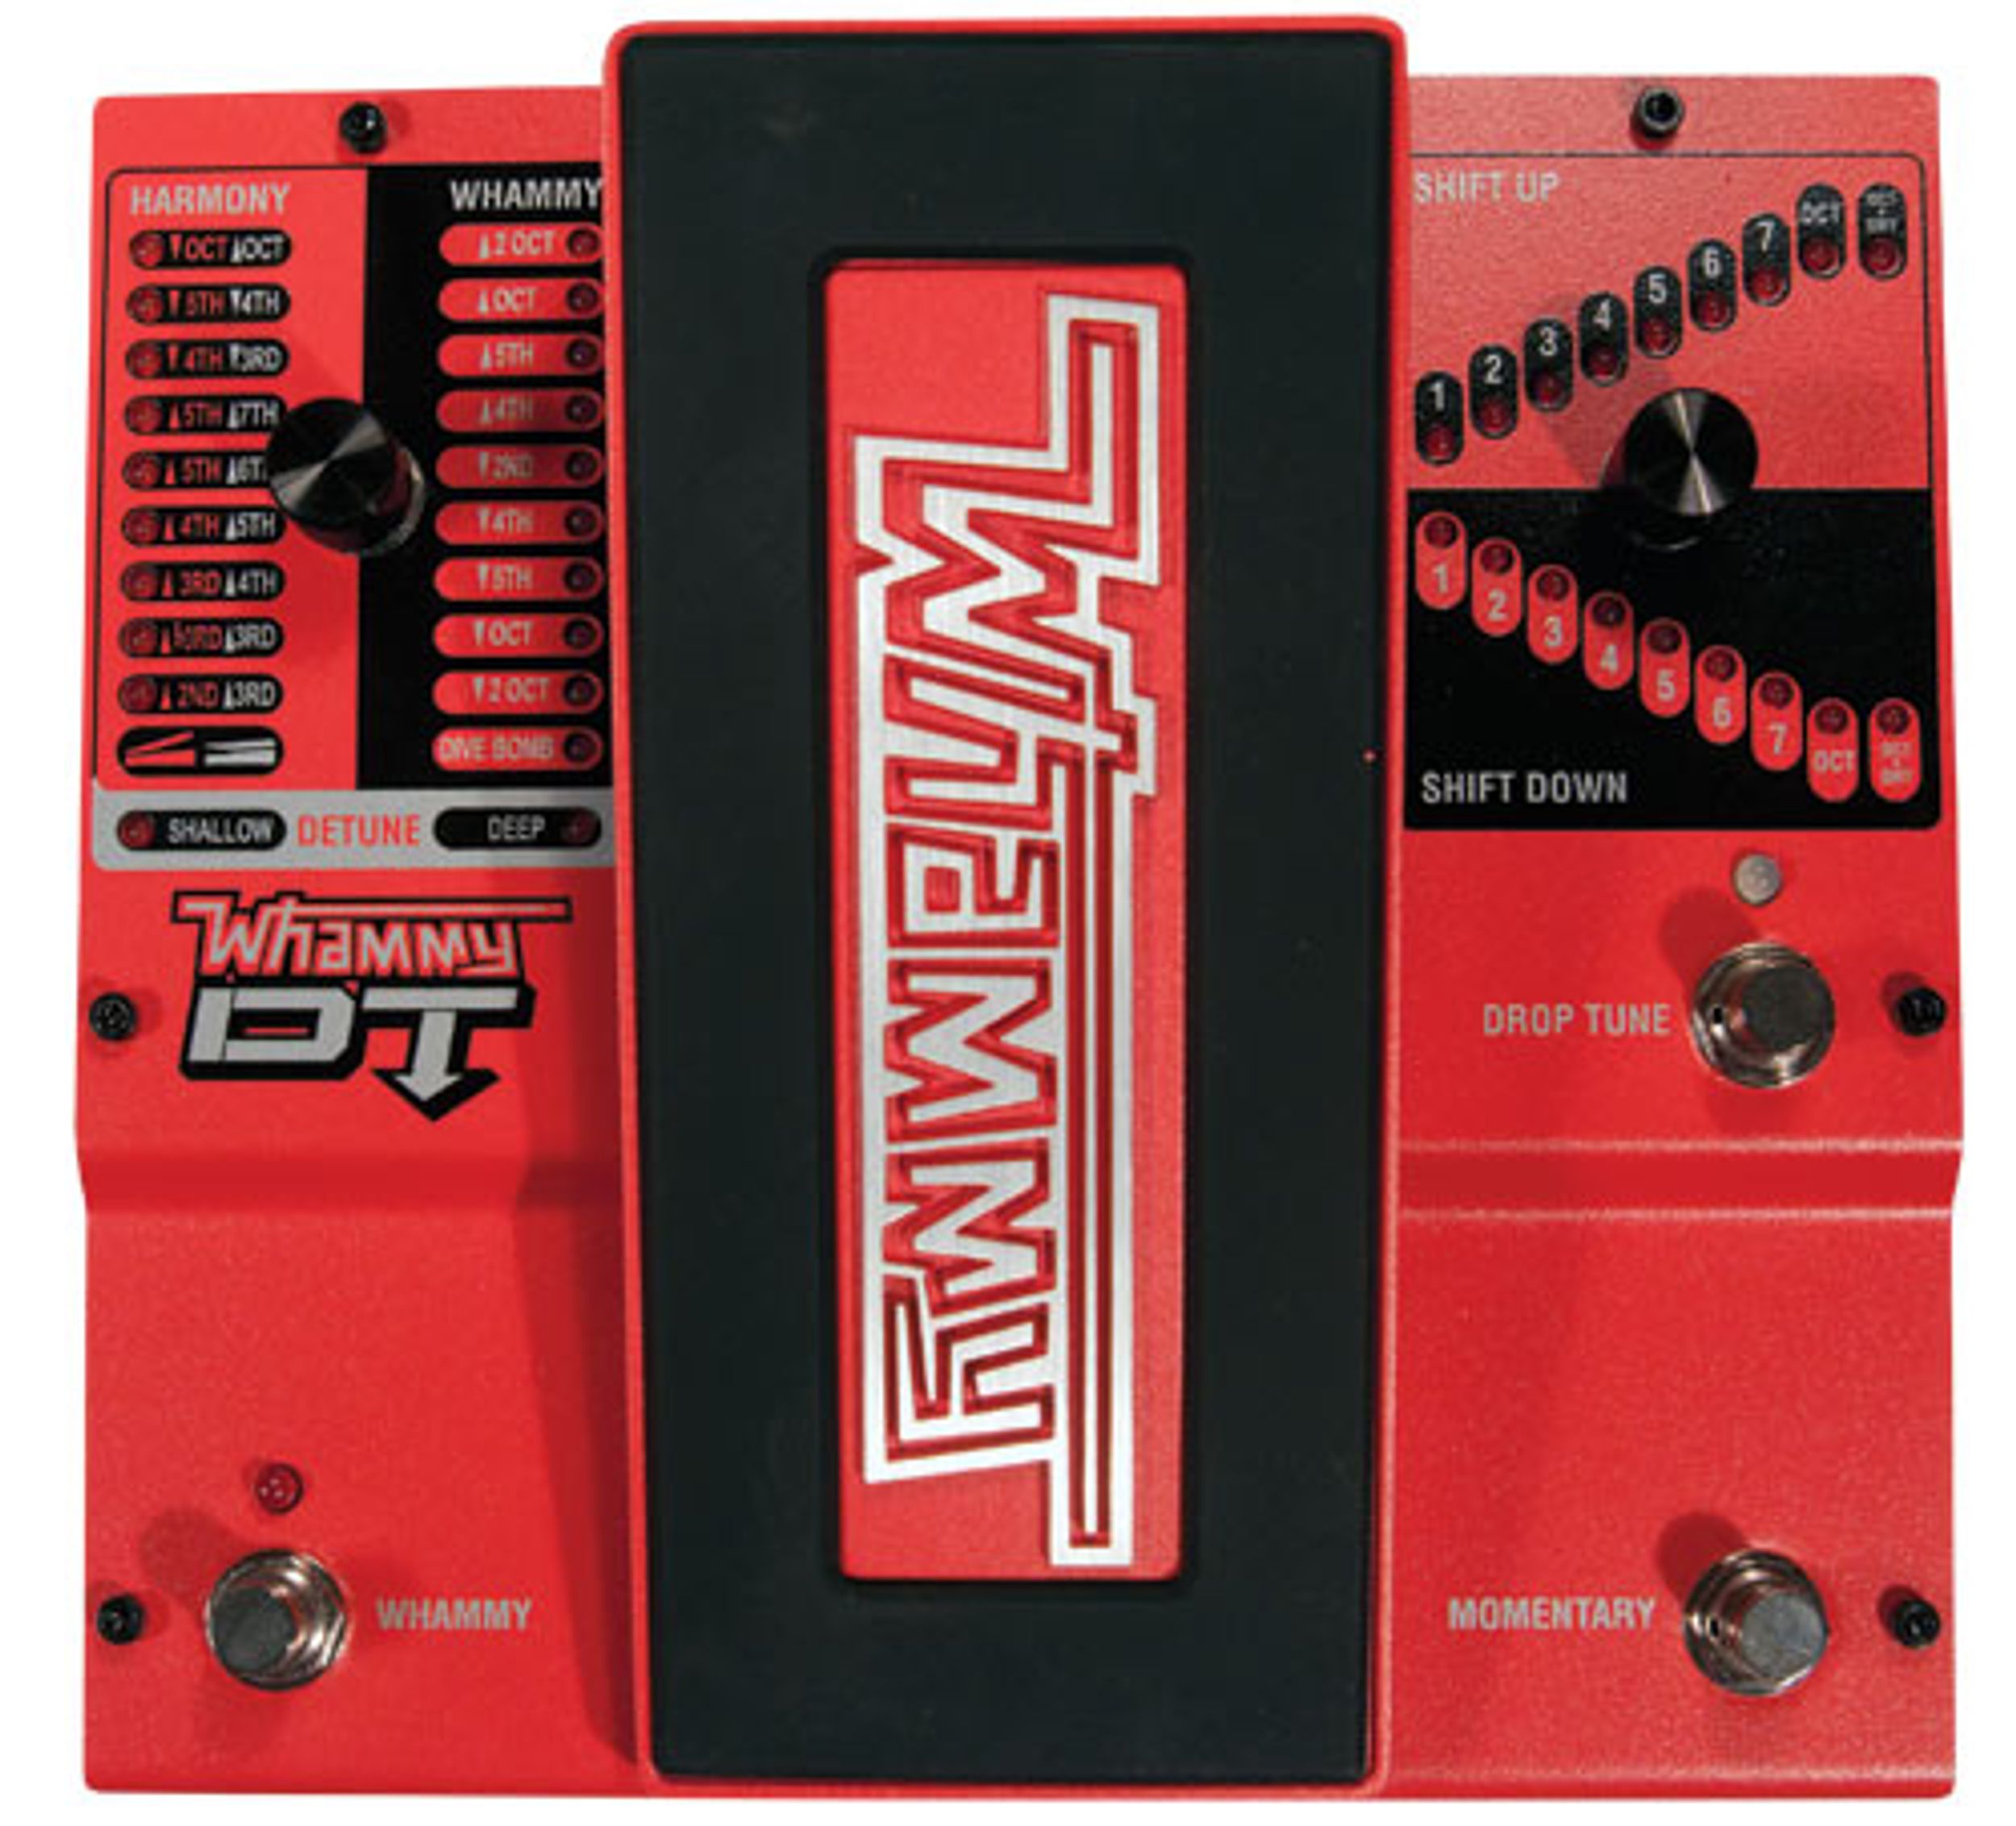 DigiTech Whammy DT Pedal Review